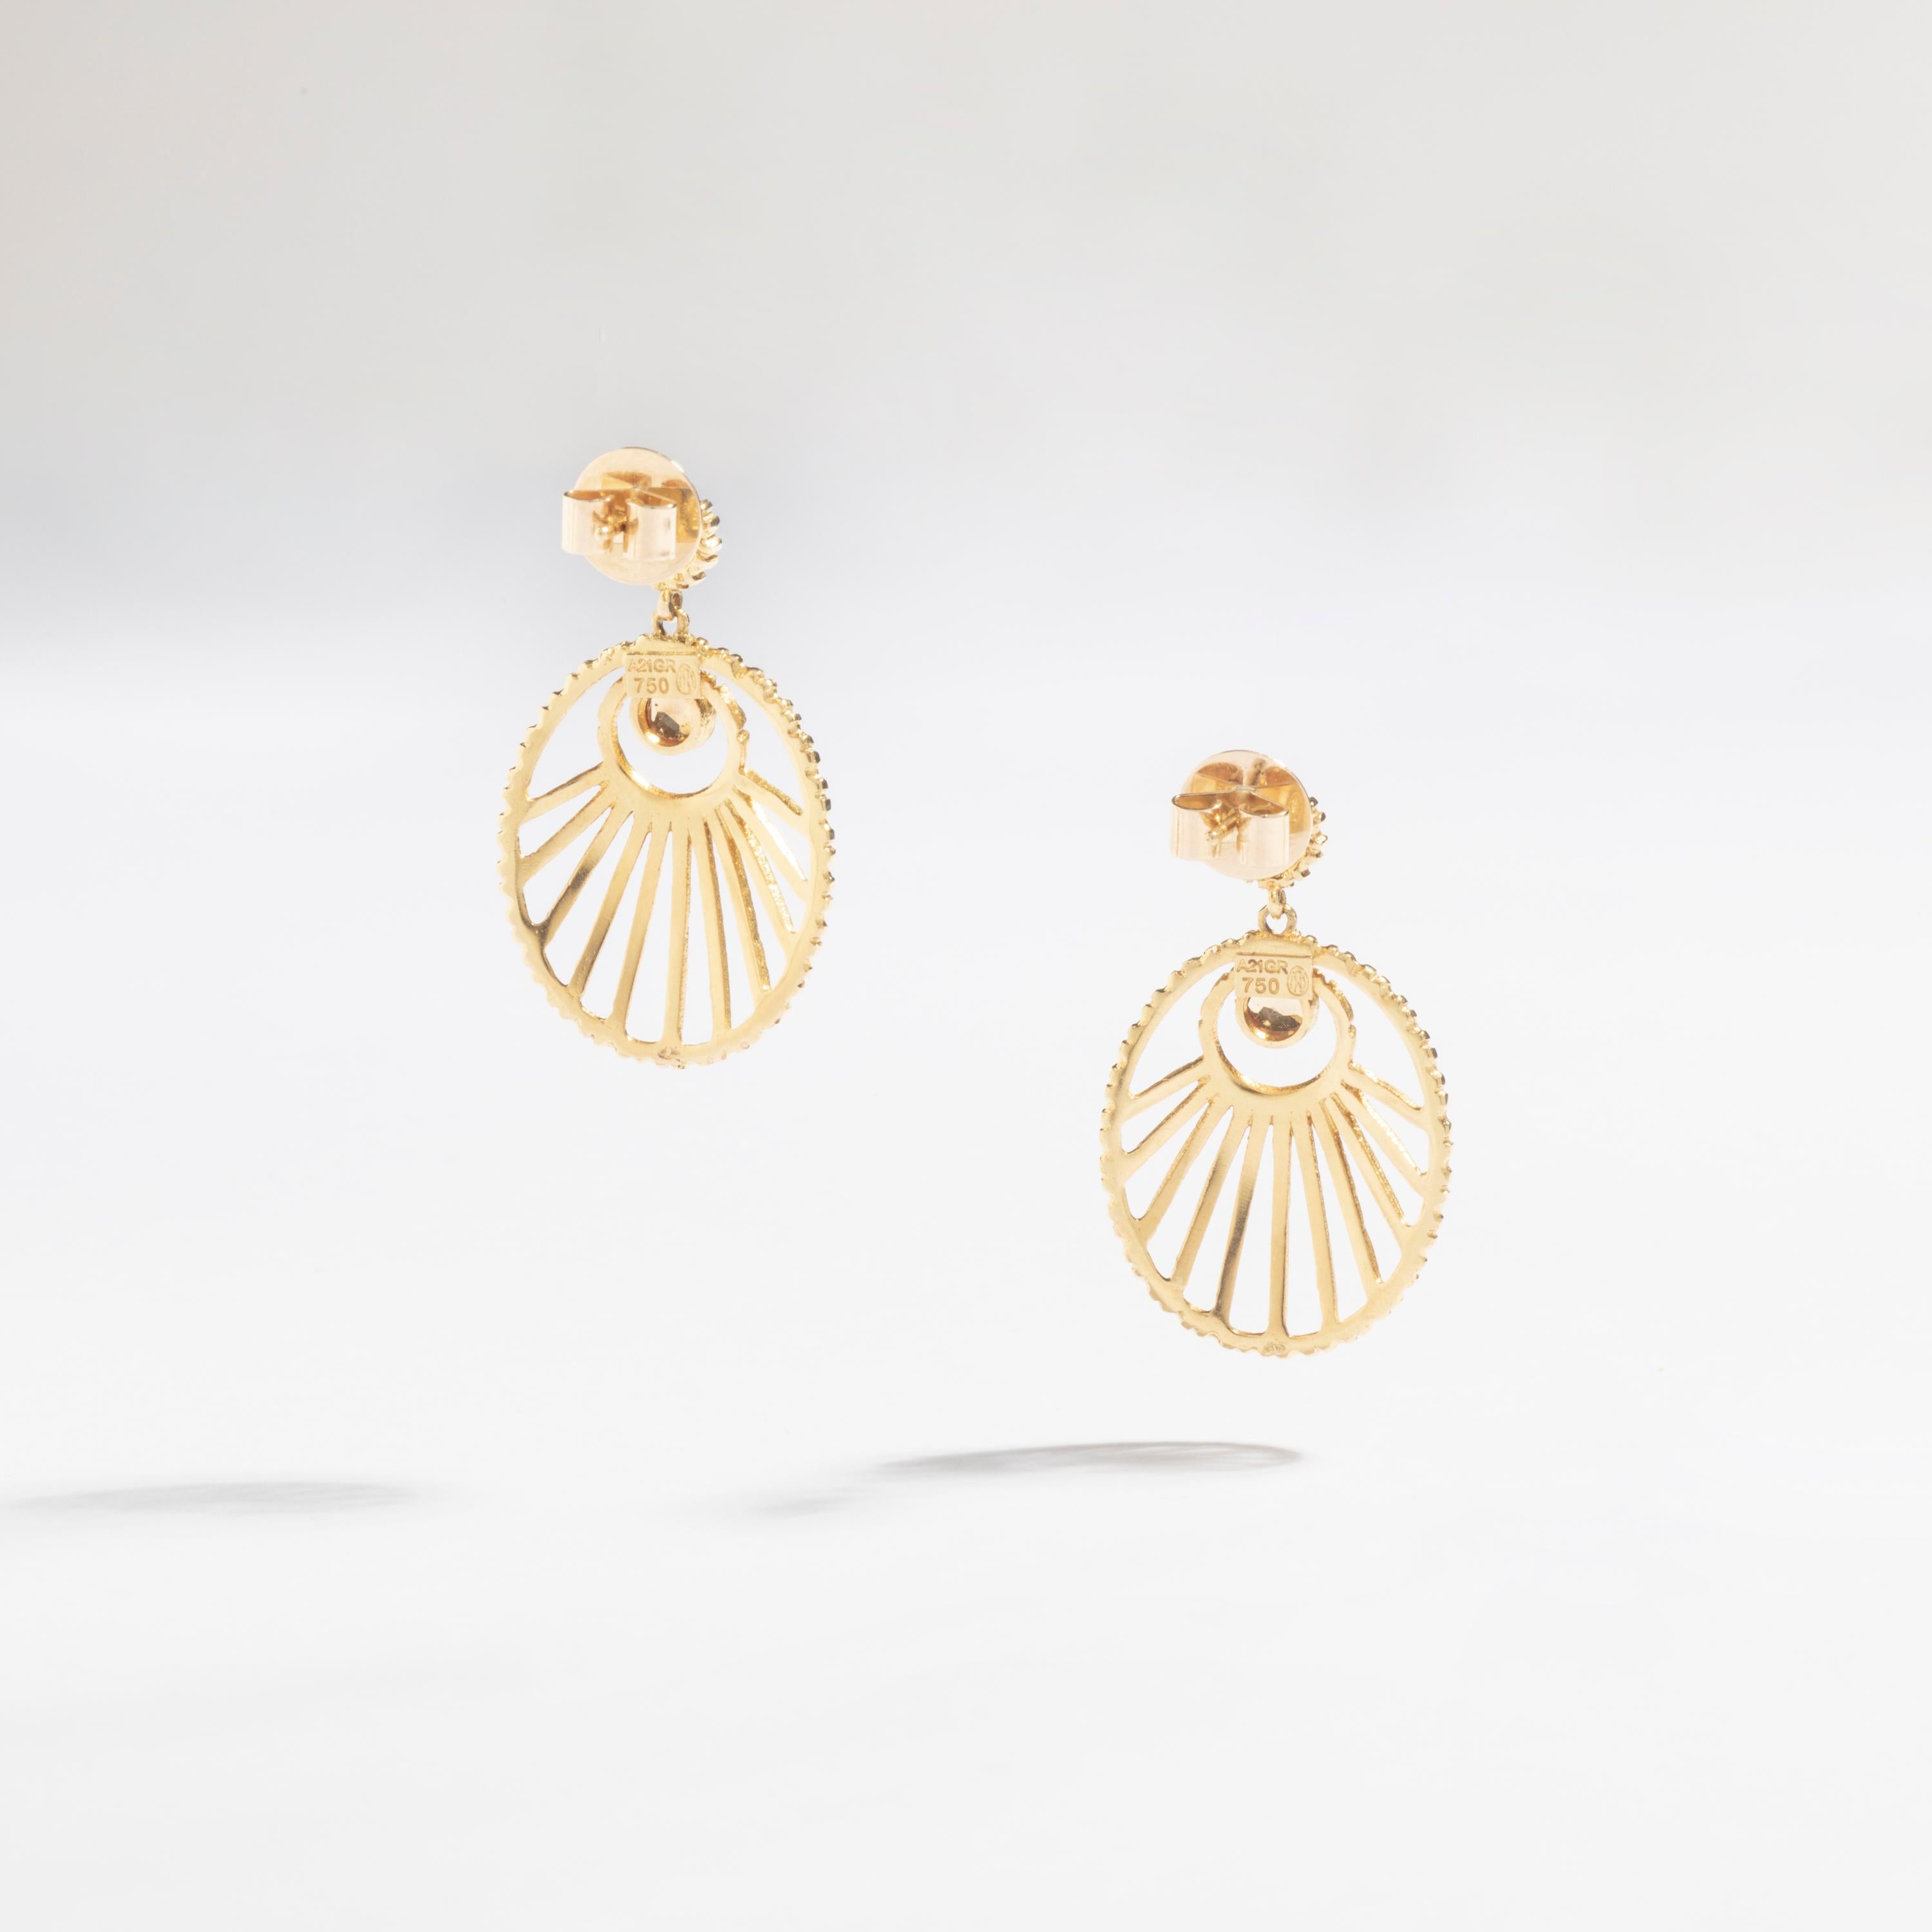 Round Cut Lalaounis Yellow Gold 18K Earrings For Sale